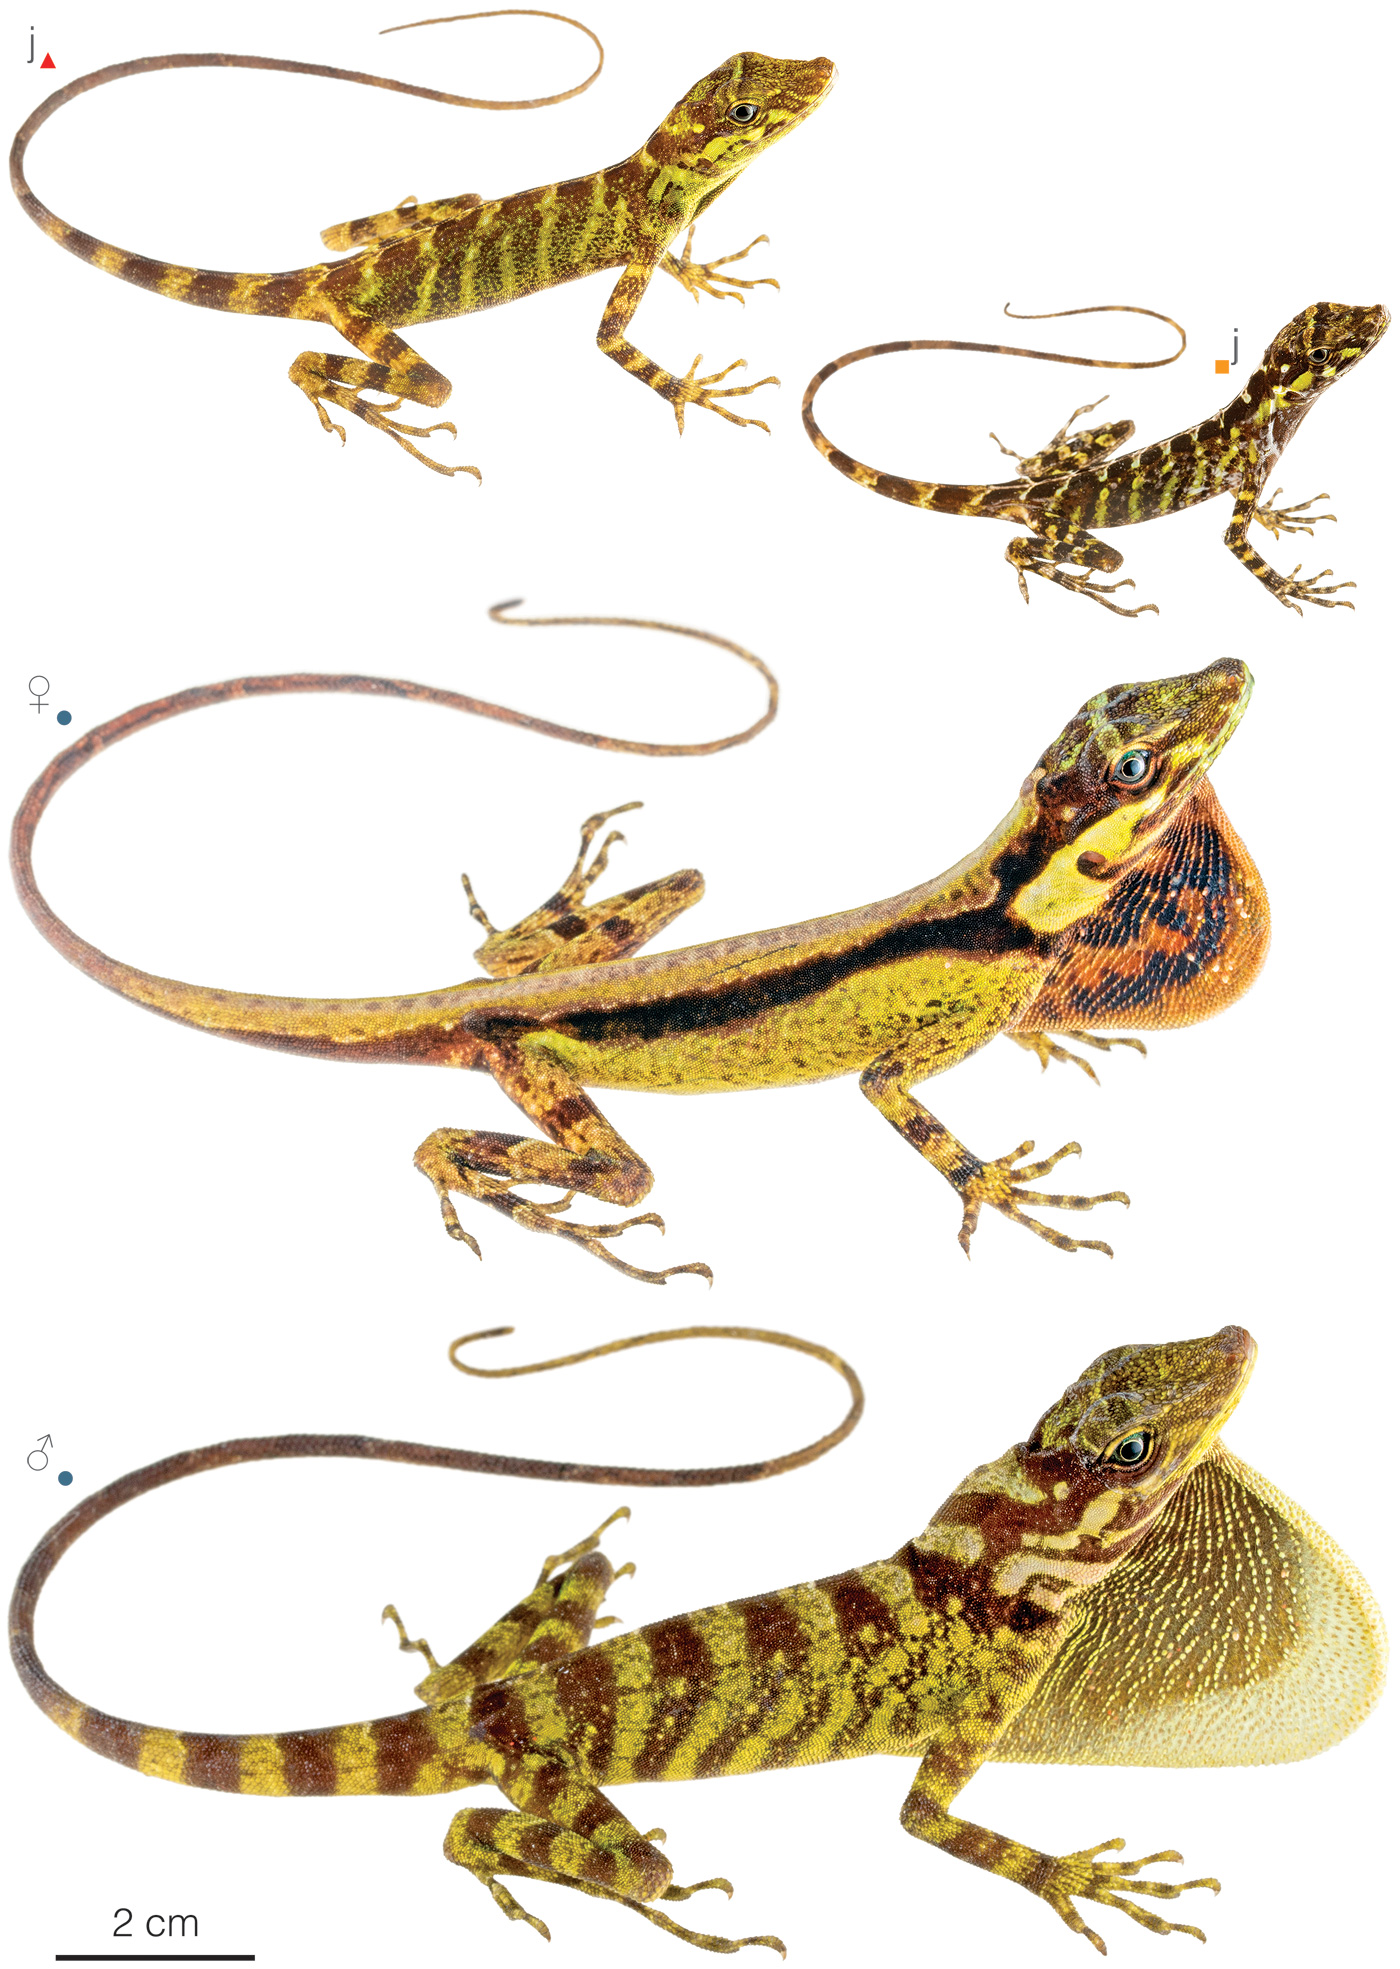 Figure showing variation among individuals of Anolis fitchi